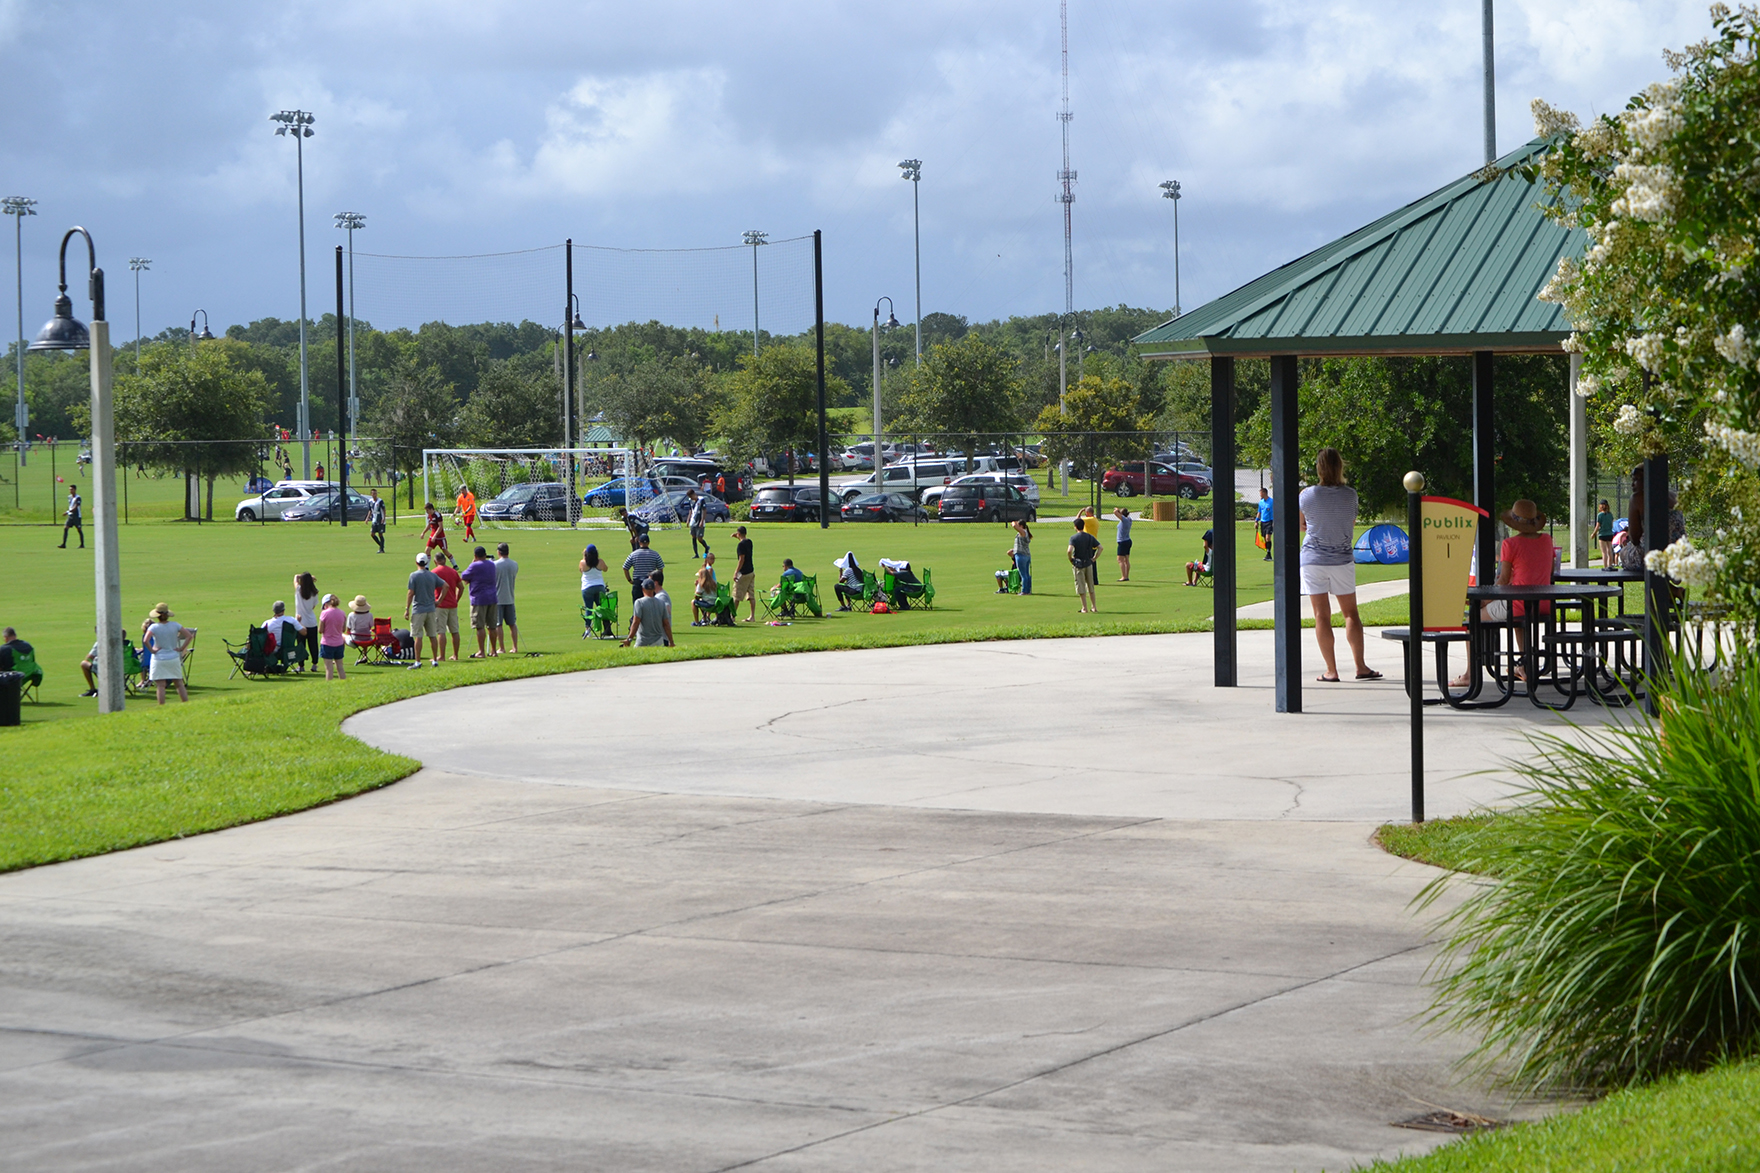 Fans watch a soccer game at the Lake Myrtle Sports Park